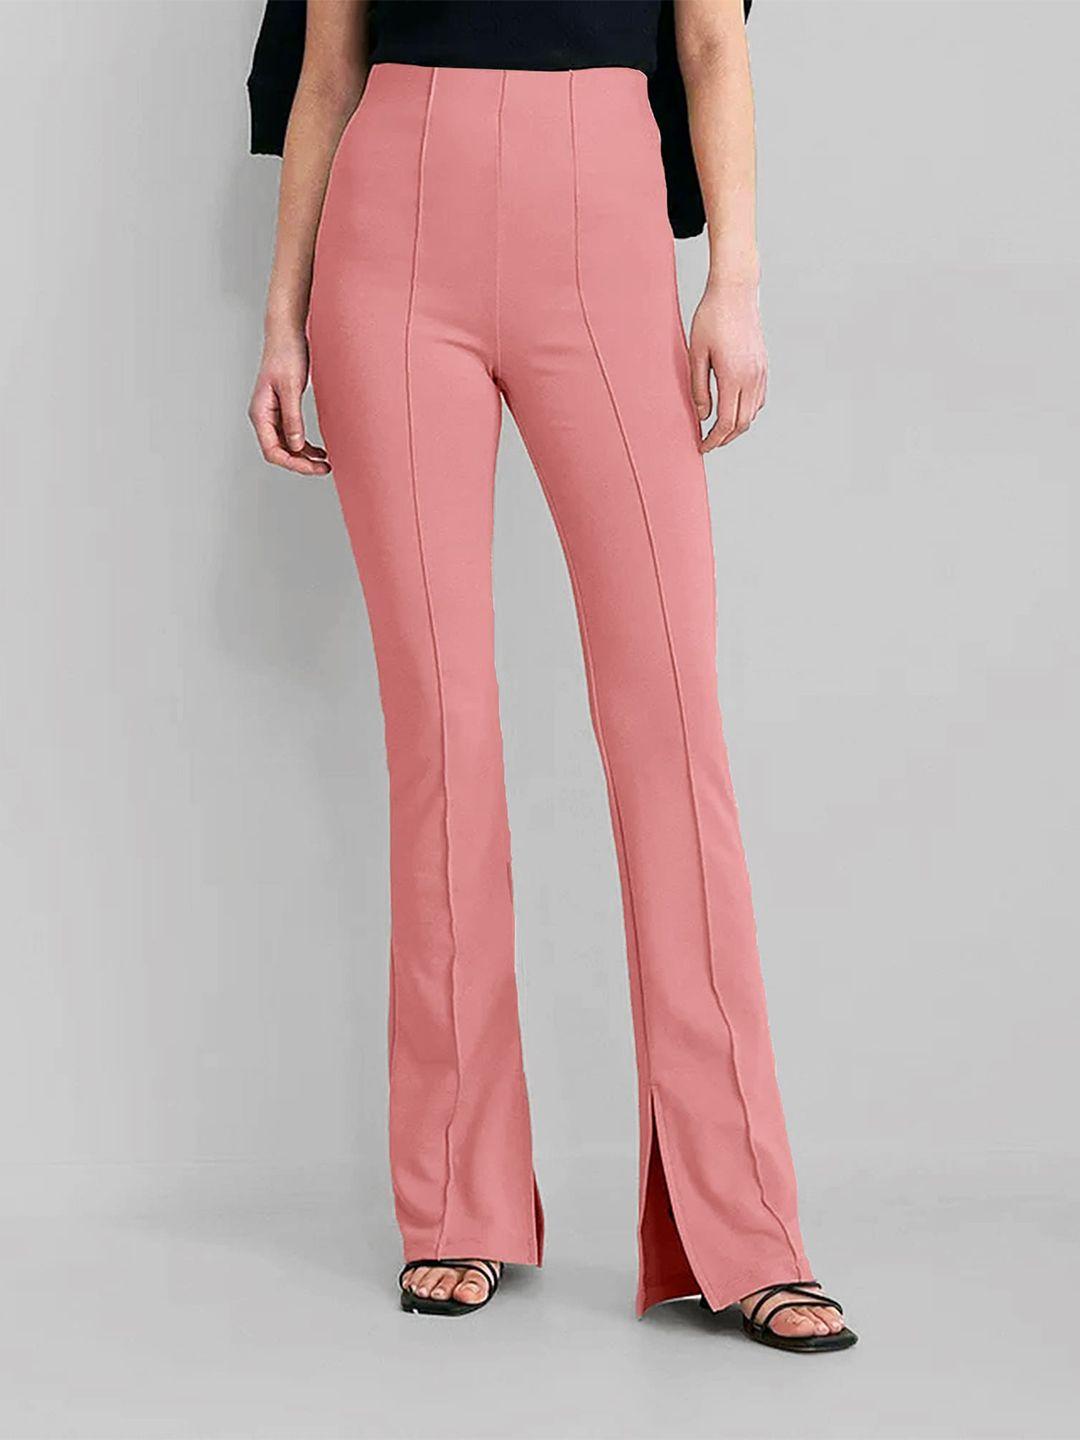 addyvero-women-peach-coloured-relaxed-high-rise-regular-fit-trousers